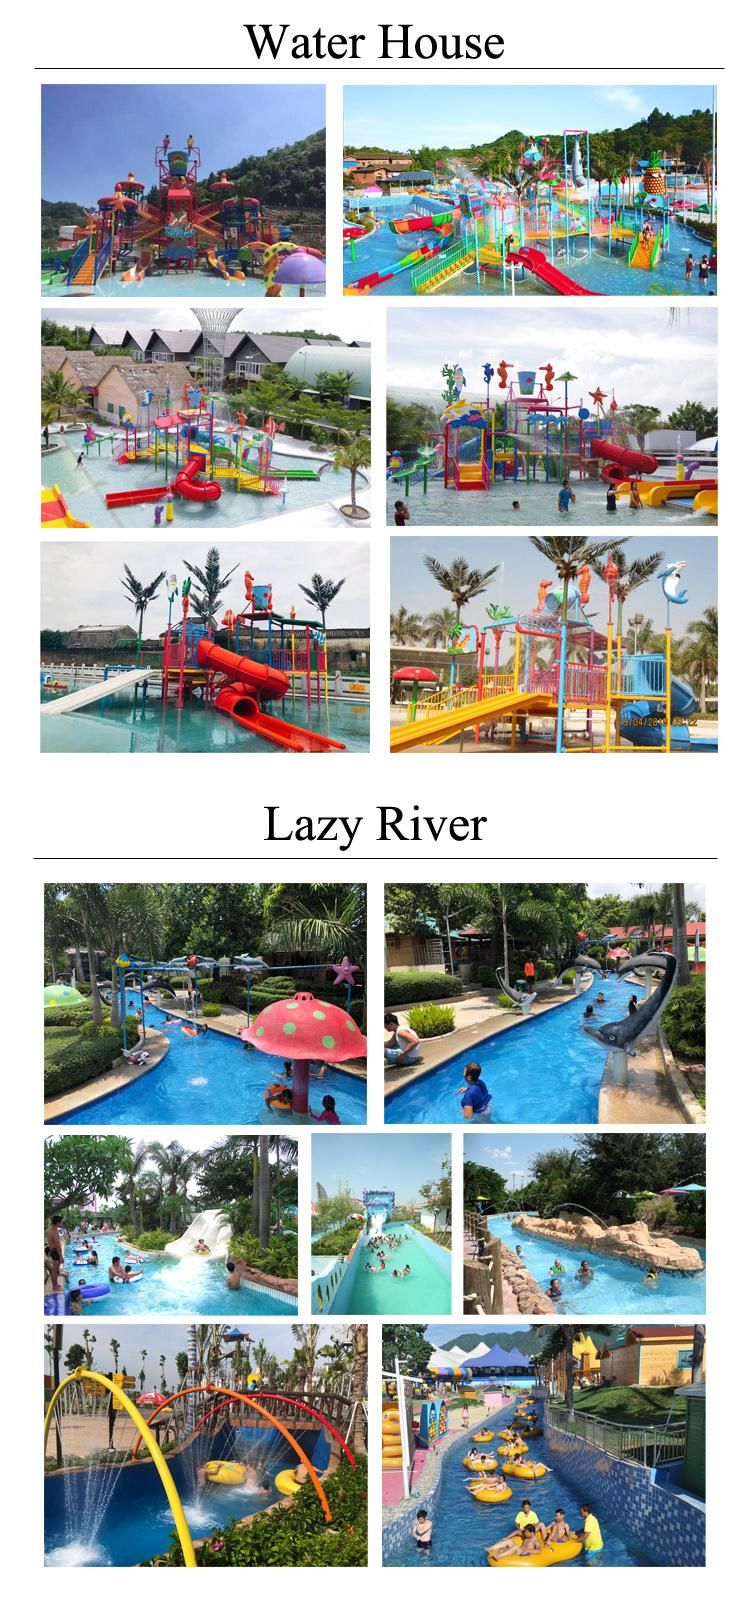 Kids Play Water Slides for Swimming Pool Park